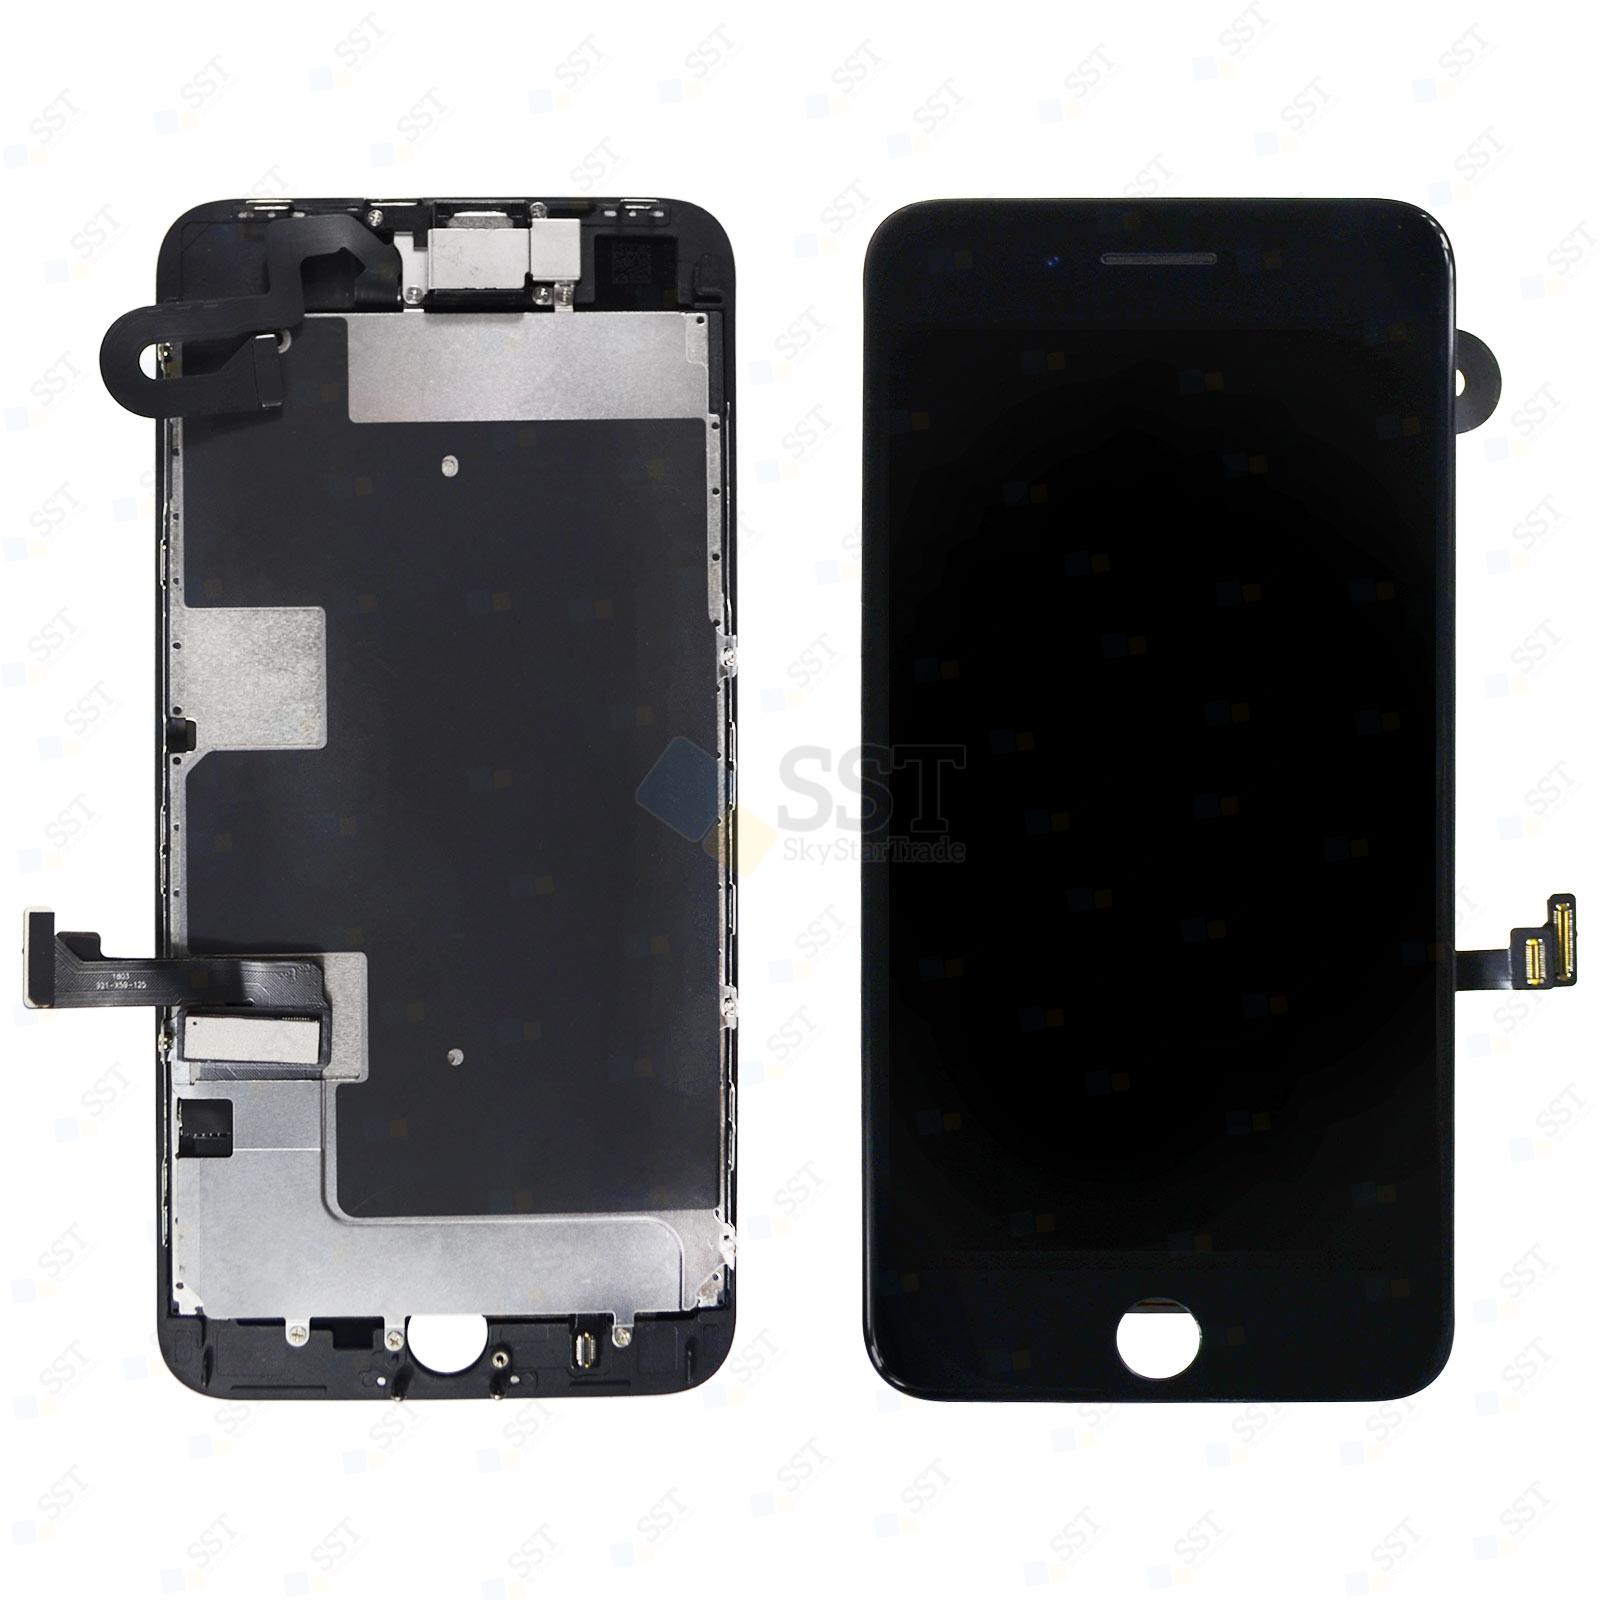 iPhone 8 Plus A1864 A1897 A1898 LCD Screen Digitizer with Bezel Frame